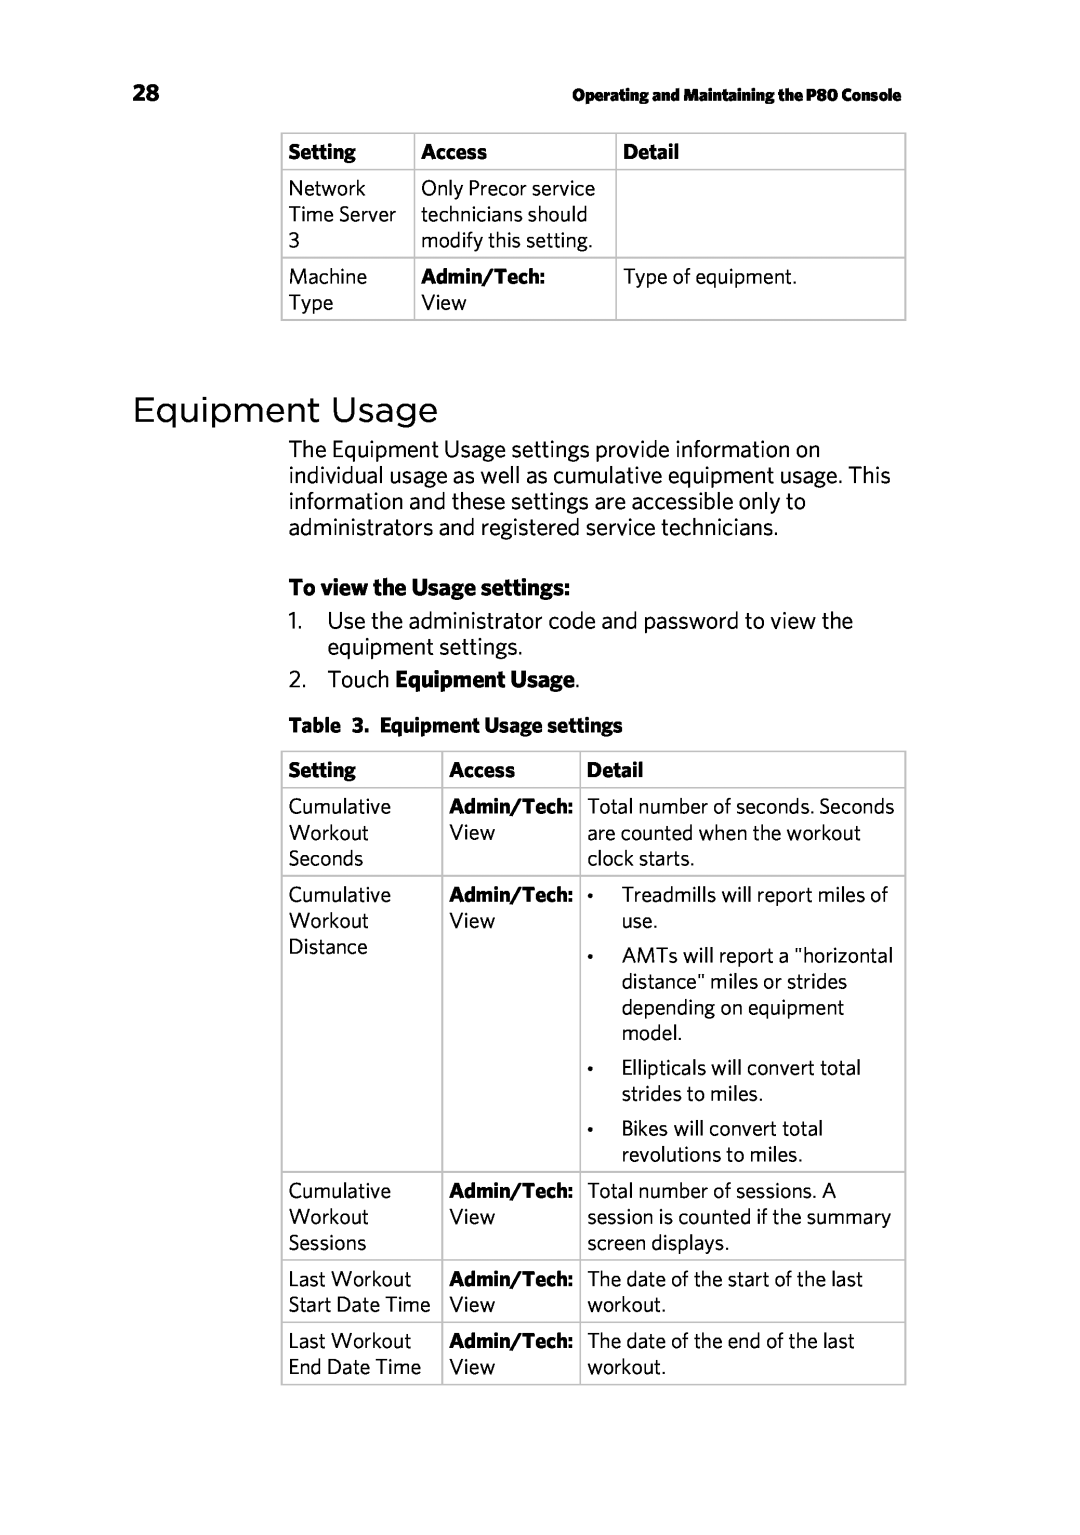 Precor P80 manual To view the Usage settings, Touch Equipment Usage 